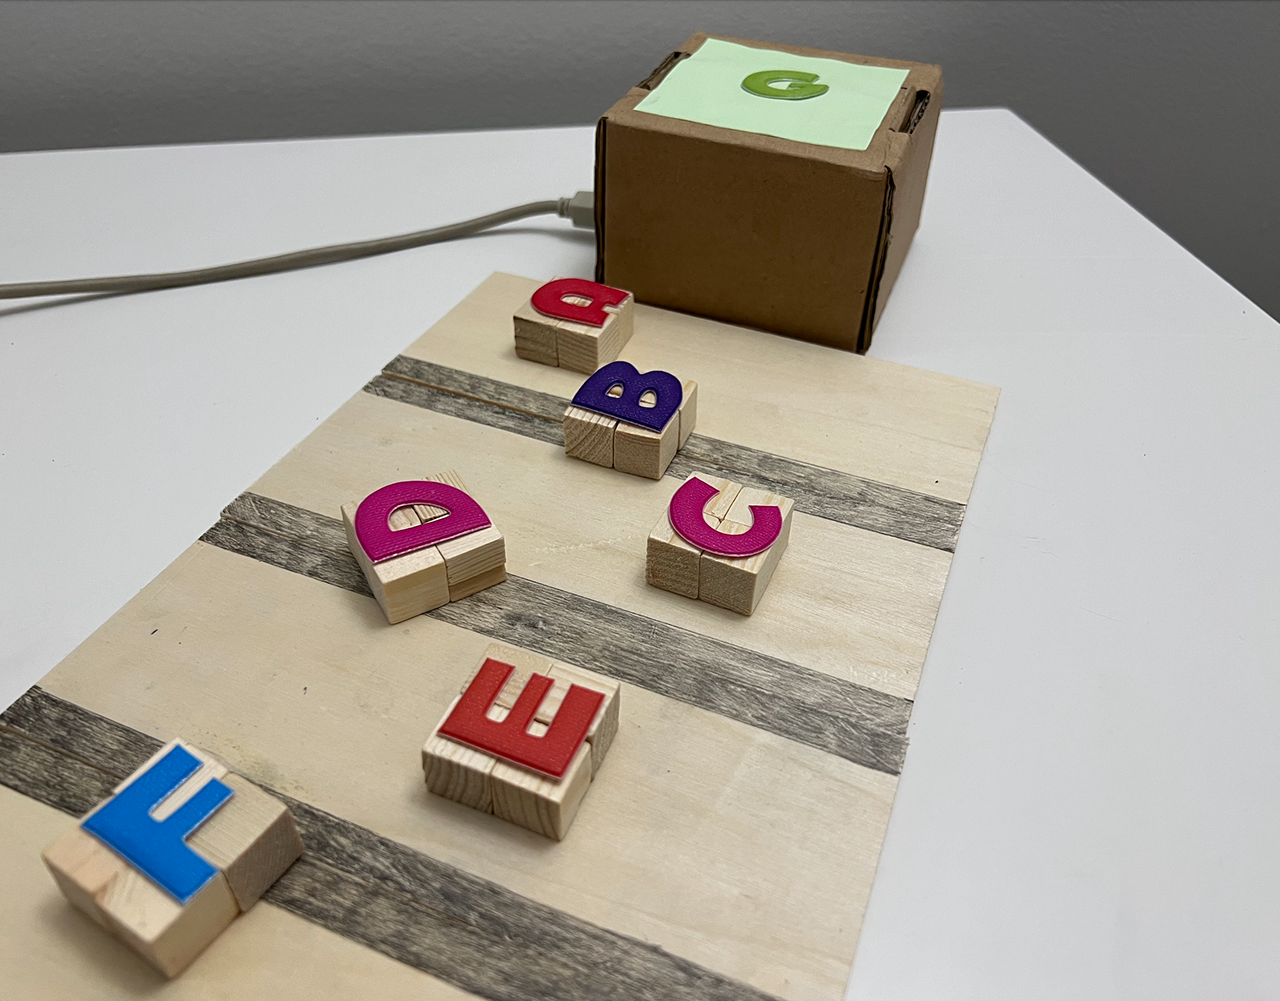 Notebox introduces children (3-6 years) to music through a interactive game where placing boxes near a Key box triggers musical notes.